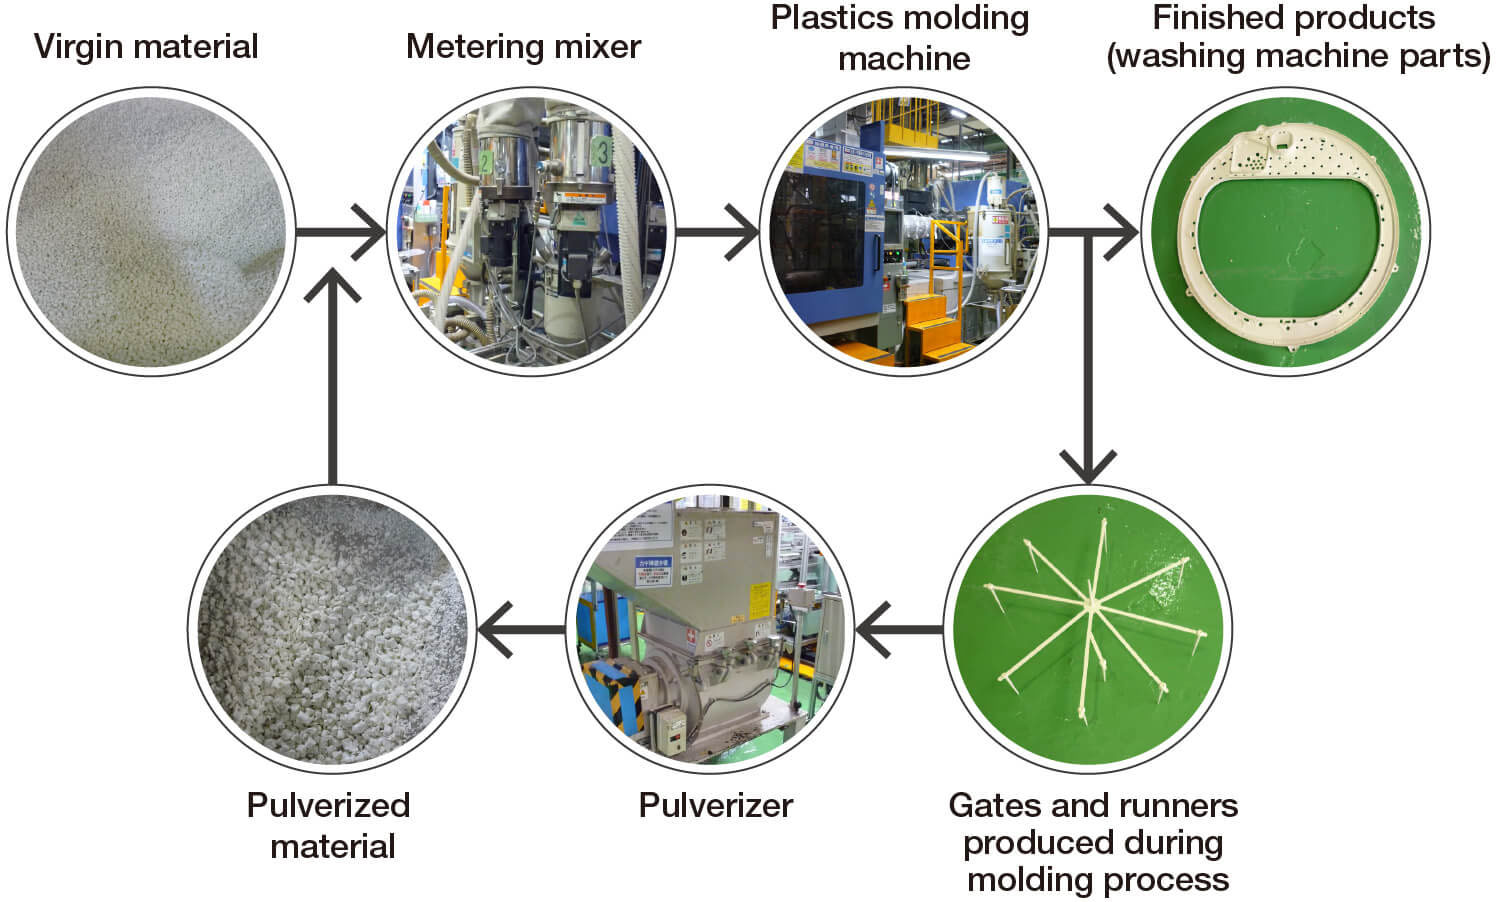 Flow of Waste Materials for Recycling During the Plastic Molding Process